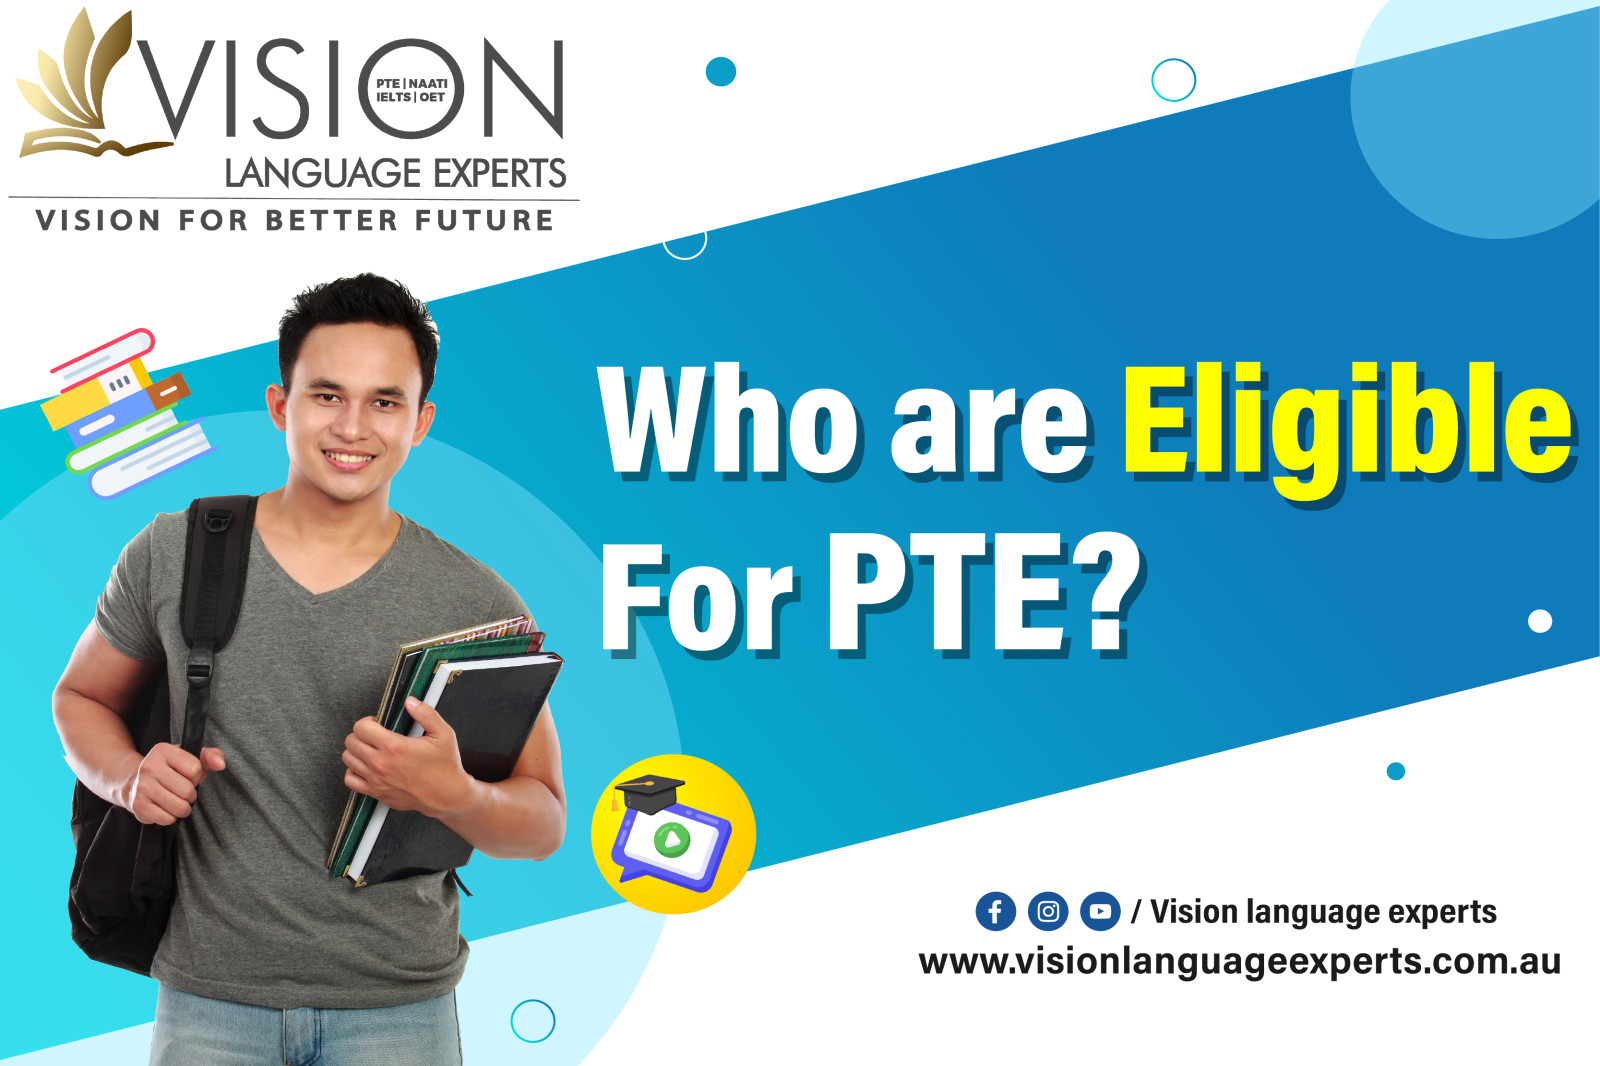 Who are Eligible for PTE?